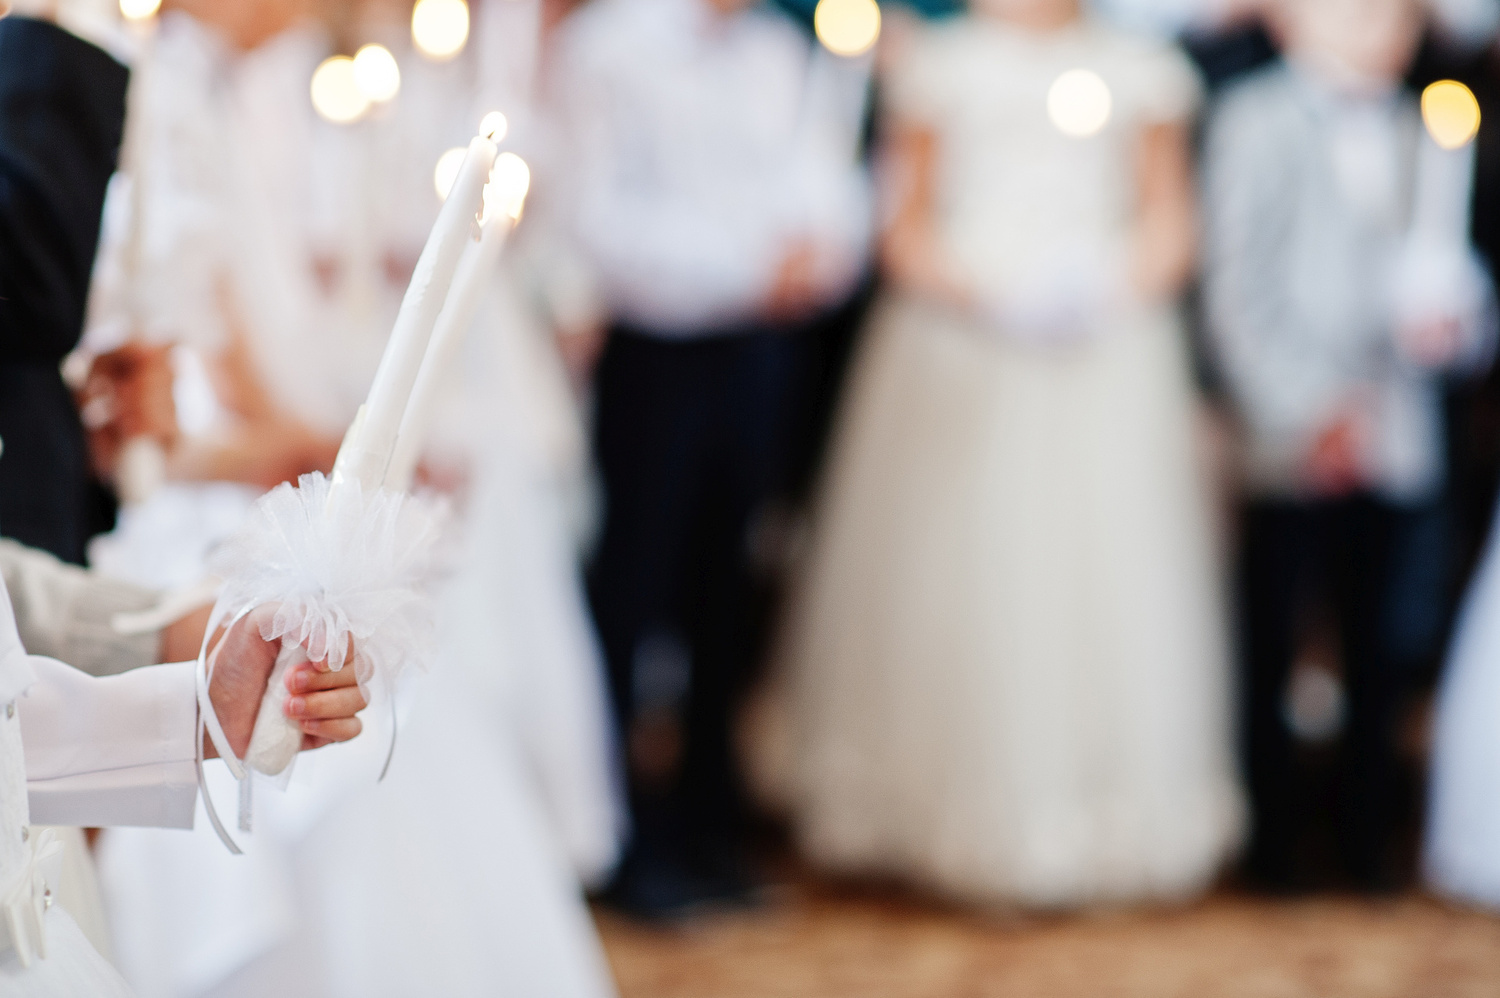 Young girl in white hold candle in hand at first holy communion.